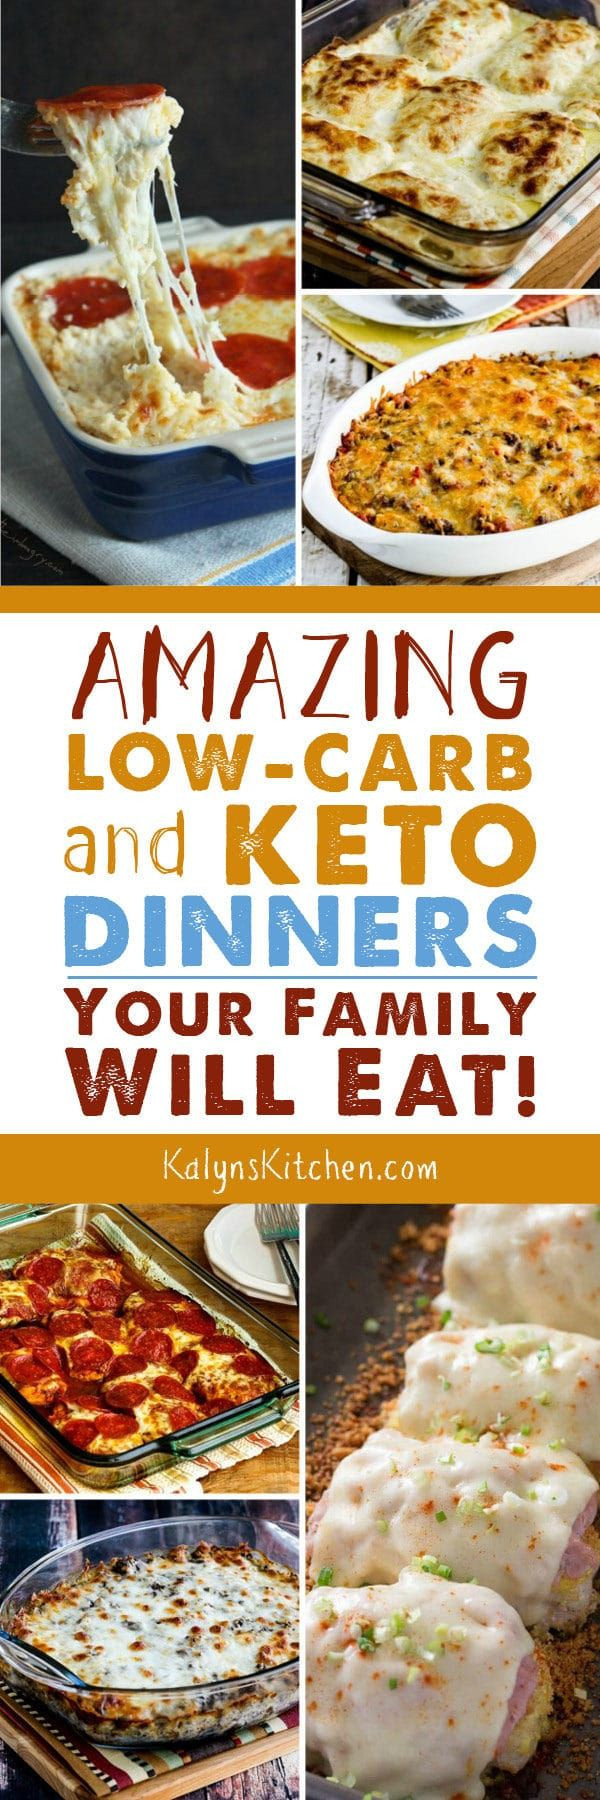 Keto Tv Dinners
 Amazing Low Carb and Keto Dinners Your Family Will Eat